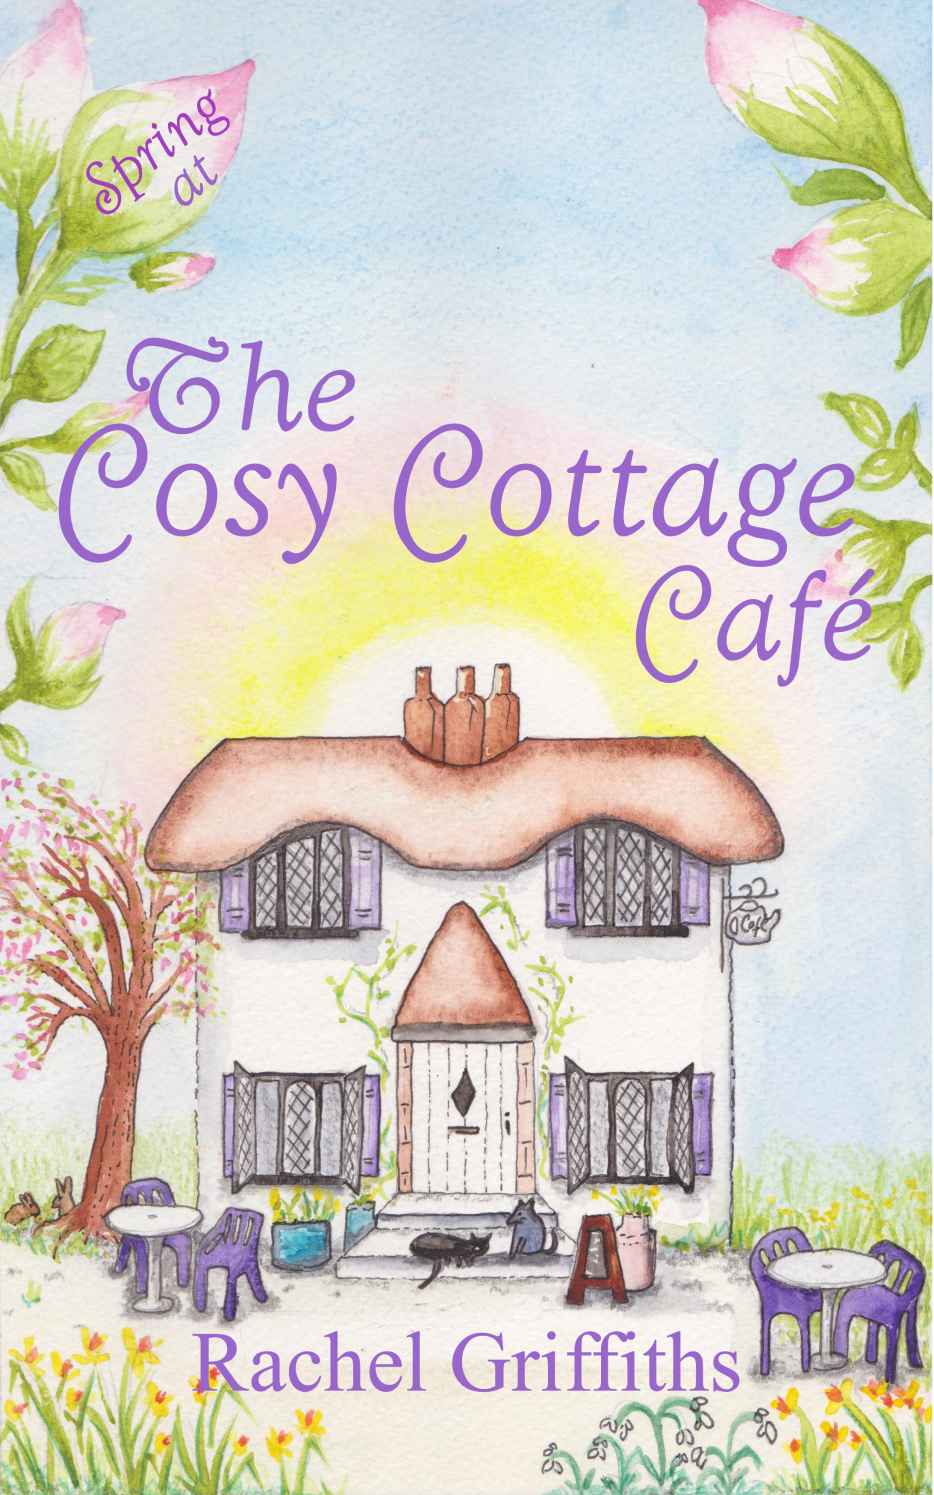 Spring at the Cosy Cottage Cafe